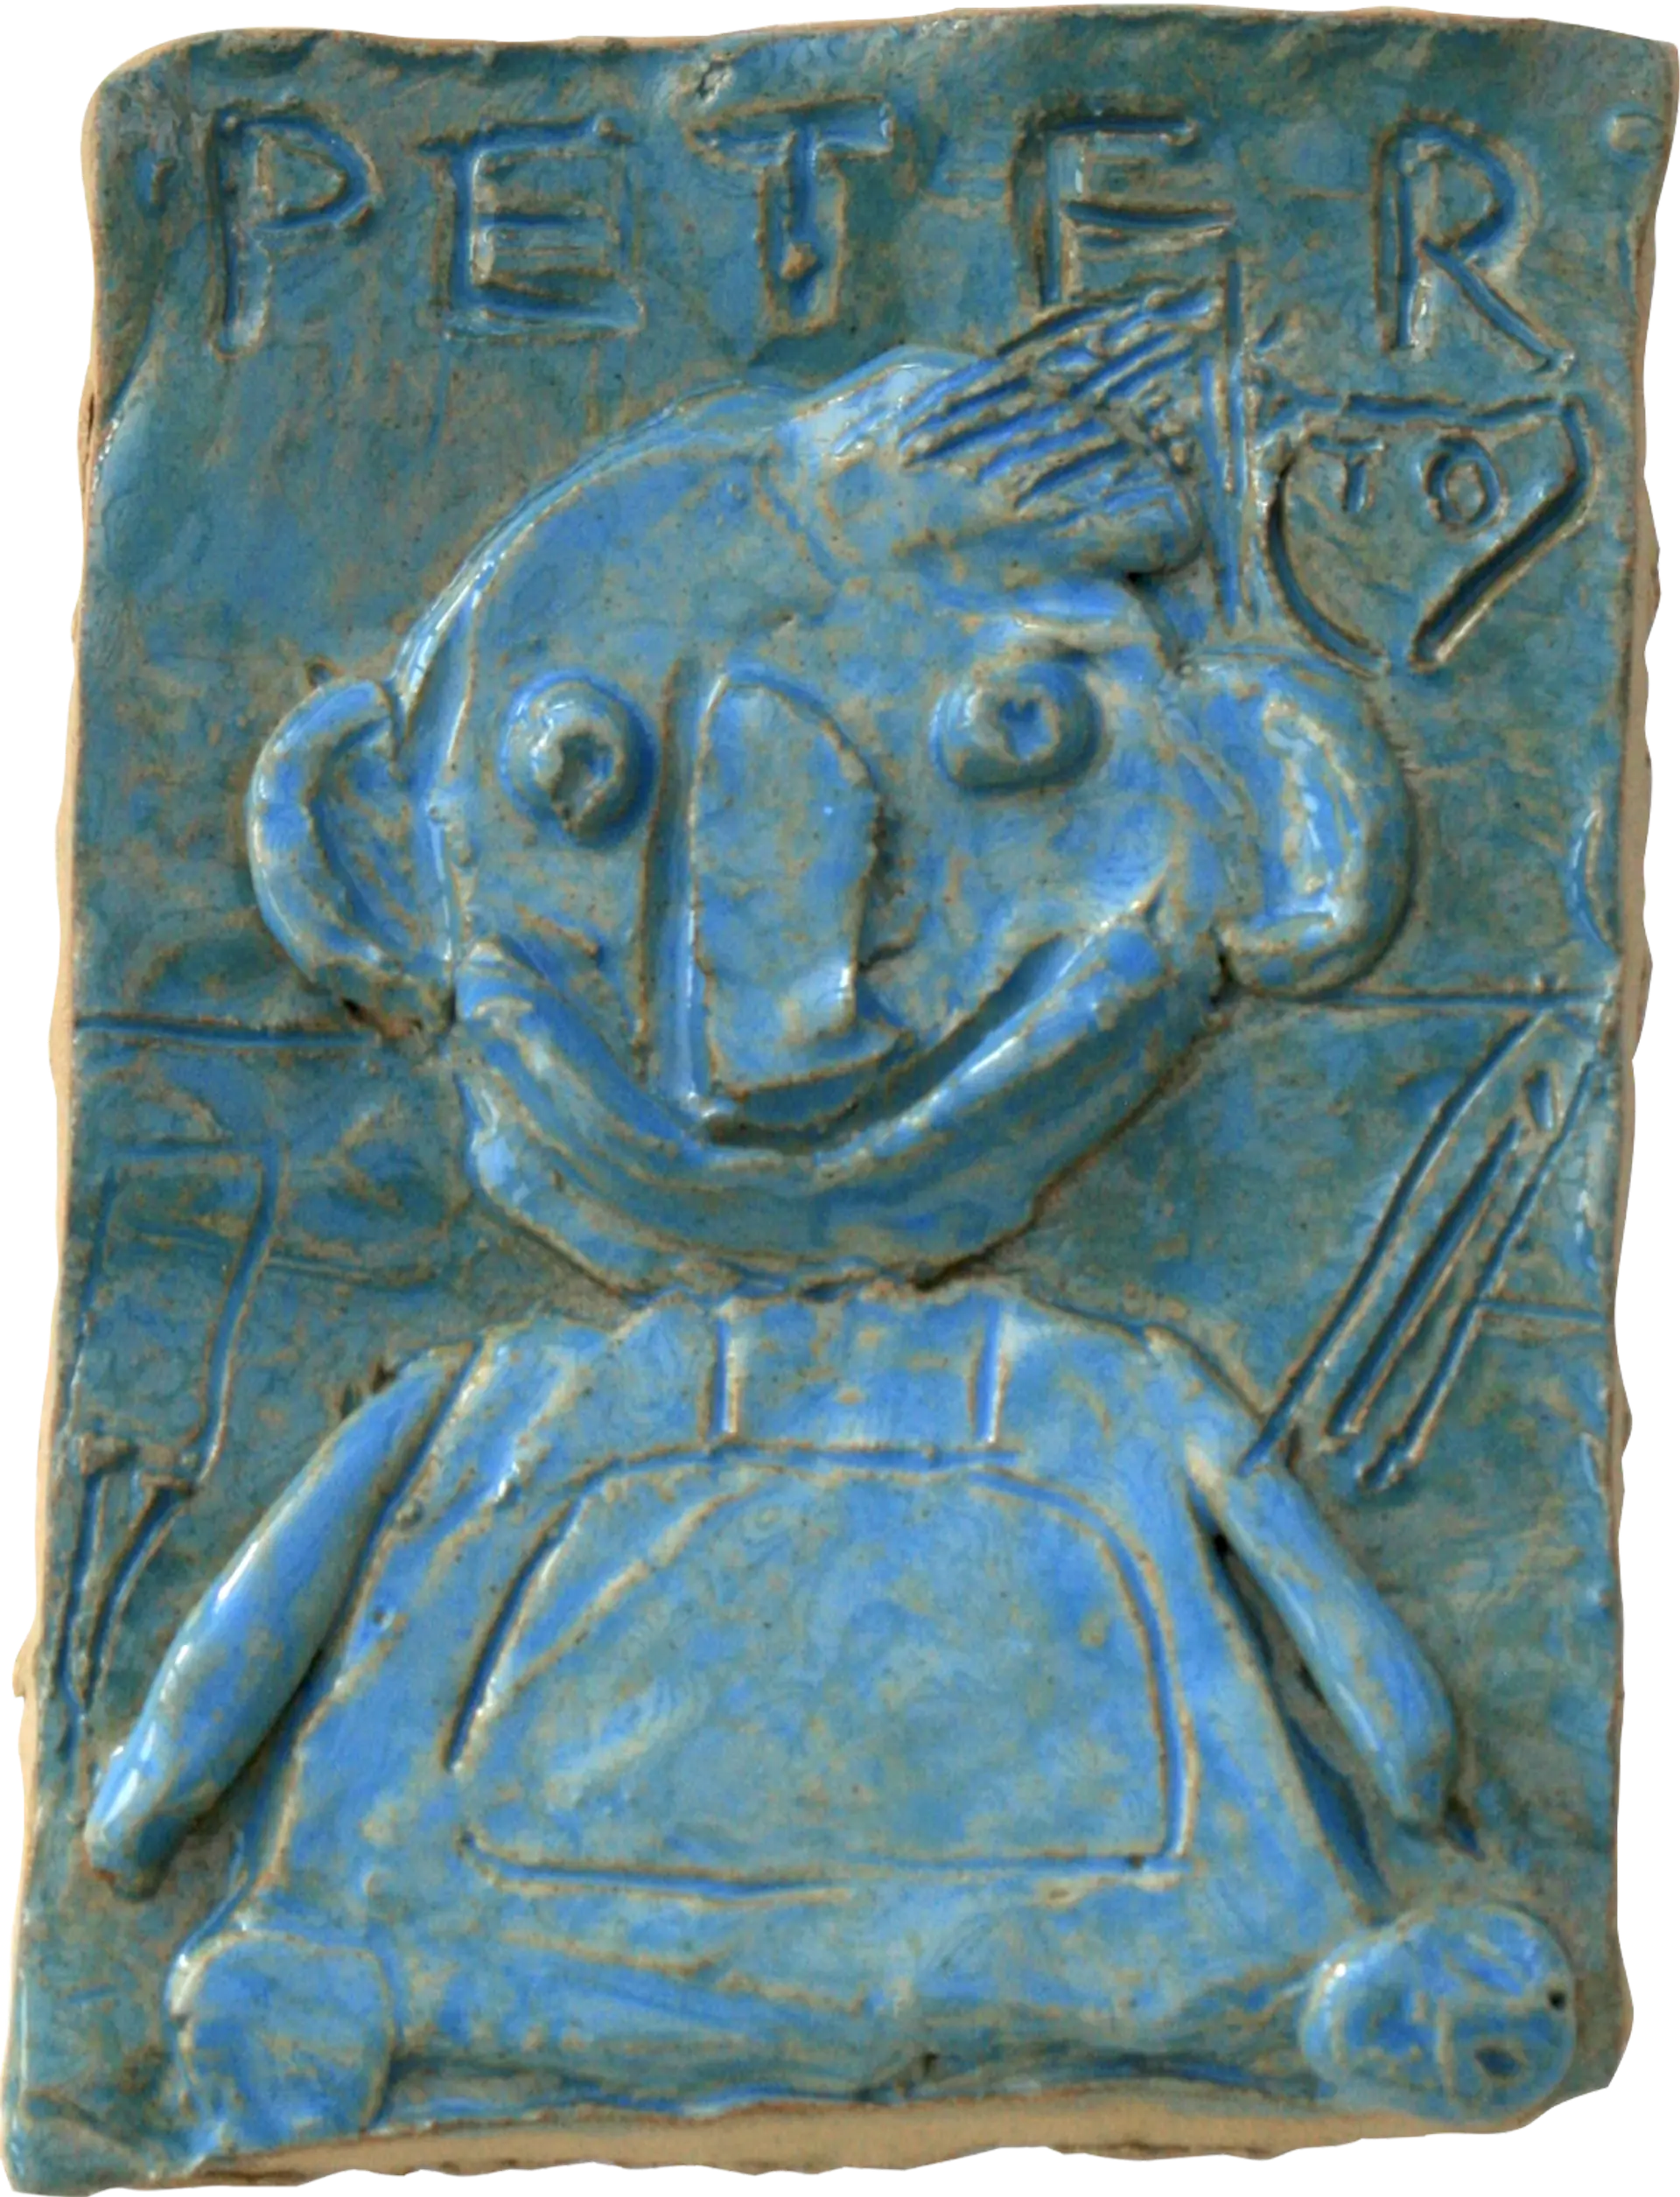 A blue glazed ceramic tile of Peter, by Helen. He is in a wheelchair. Above his portrait Helen has written his name, and has drawn the Arbroath football team logo